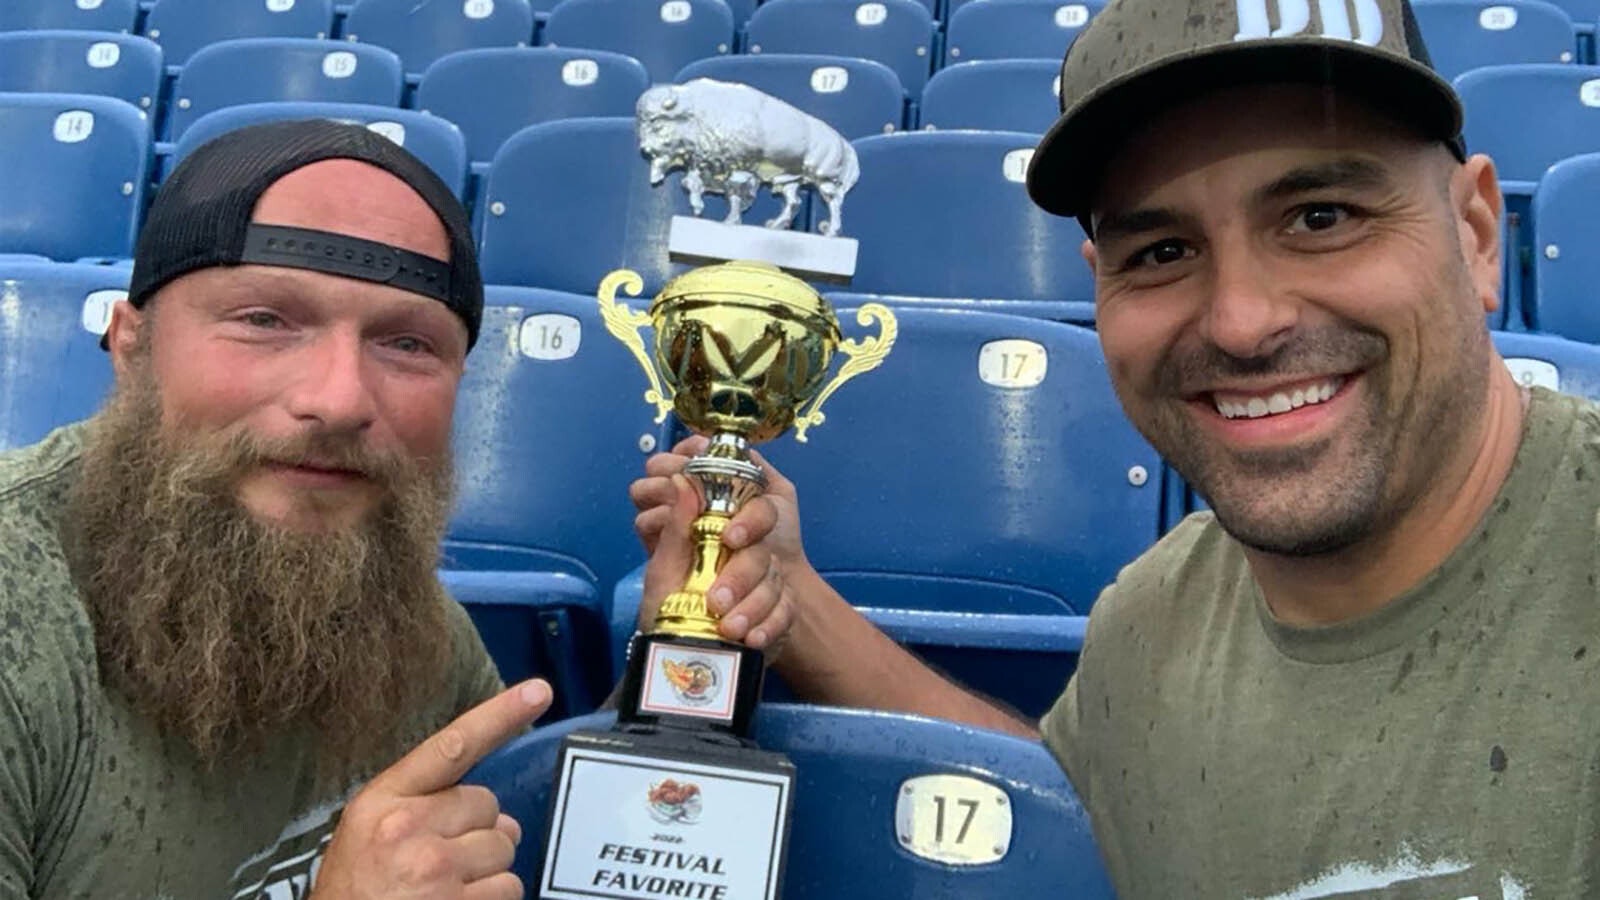 Trent Weitzel, left, and Dallas Lopez hoist the Festival Favorite trophy at the National Buffalo Wing Festival in Buffalo, New York.